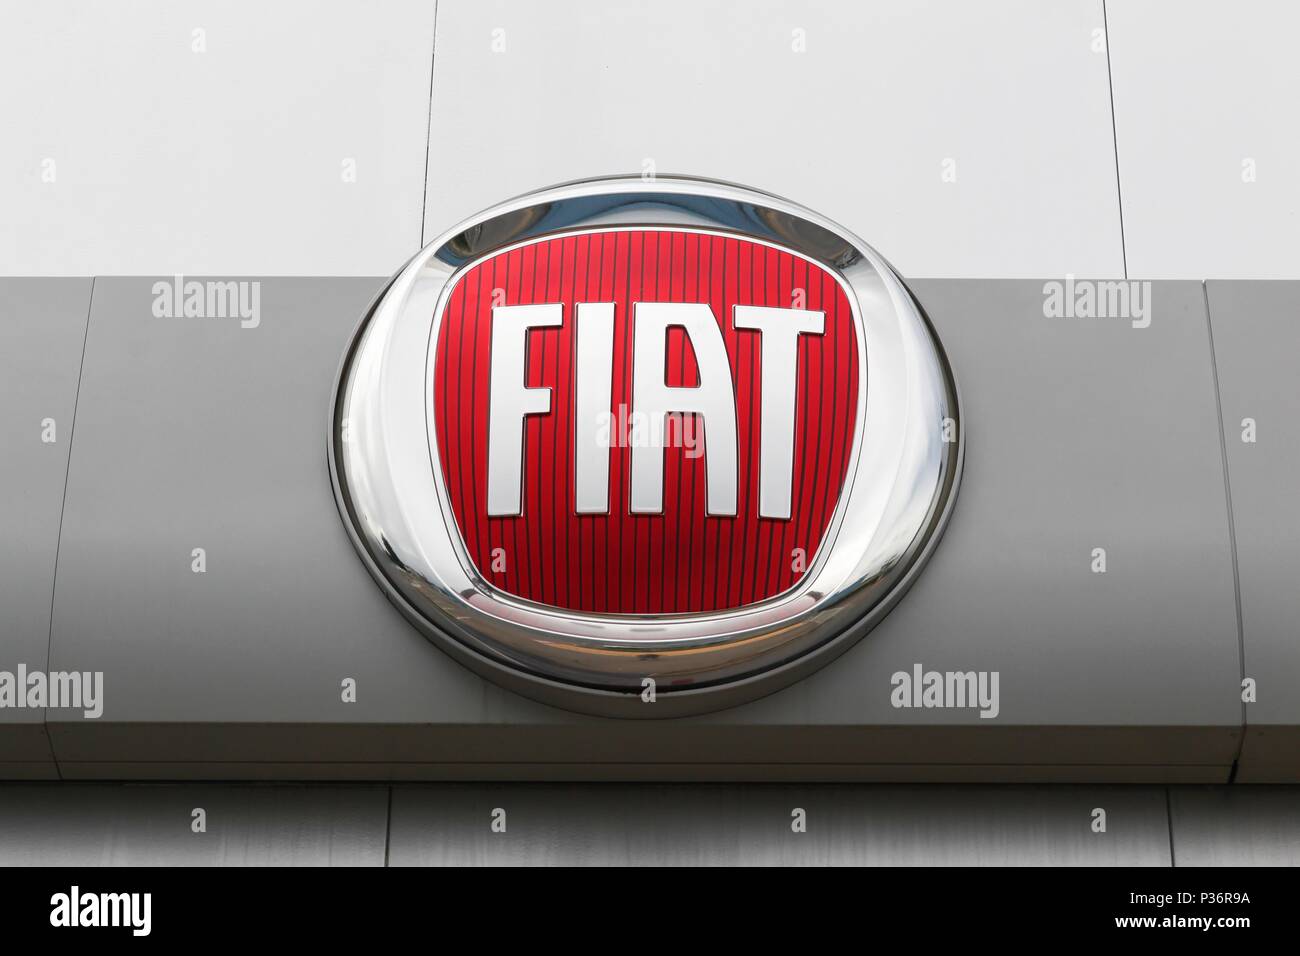 Macon, France - May 27, 2018: Fiat logo on a wall. Fiat Chrysler Automobiles is an Italian-American corporation Stock Photo